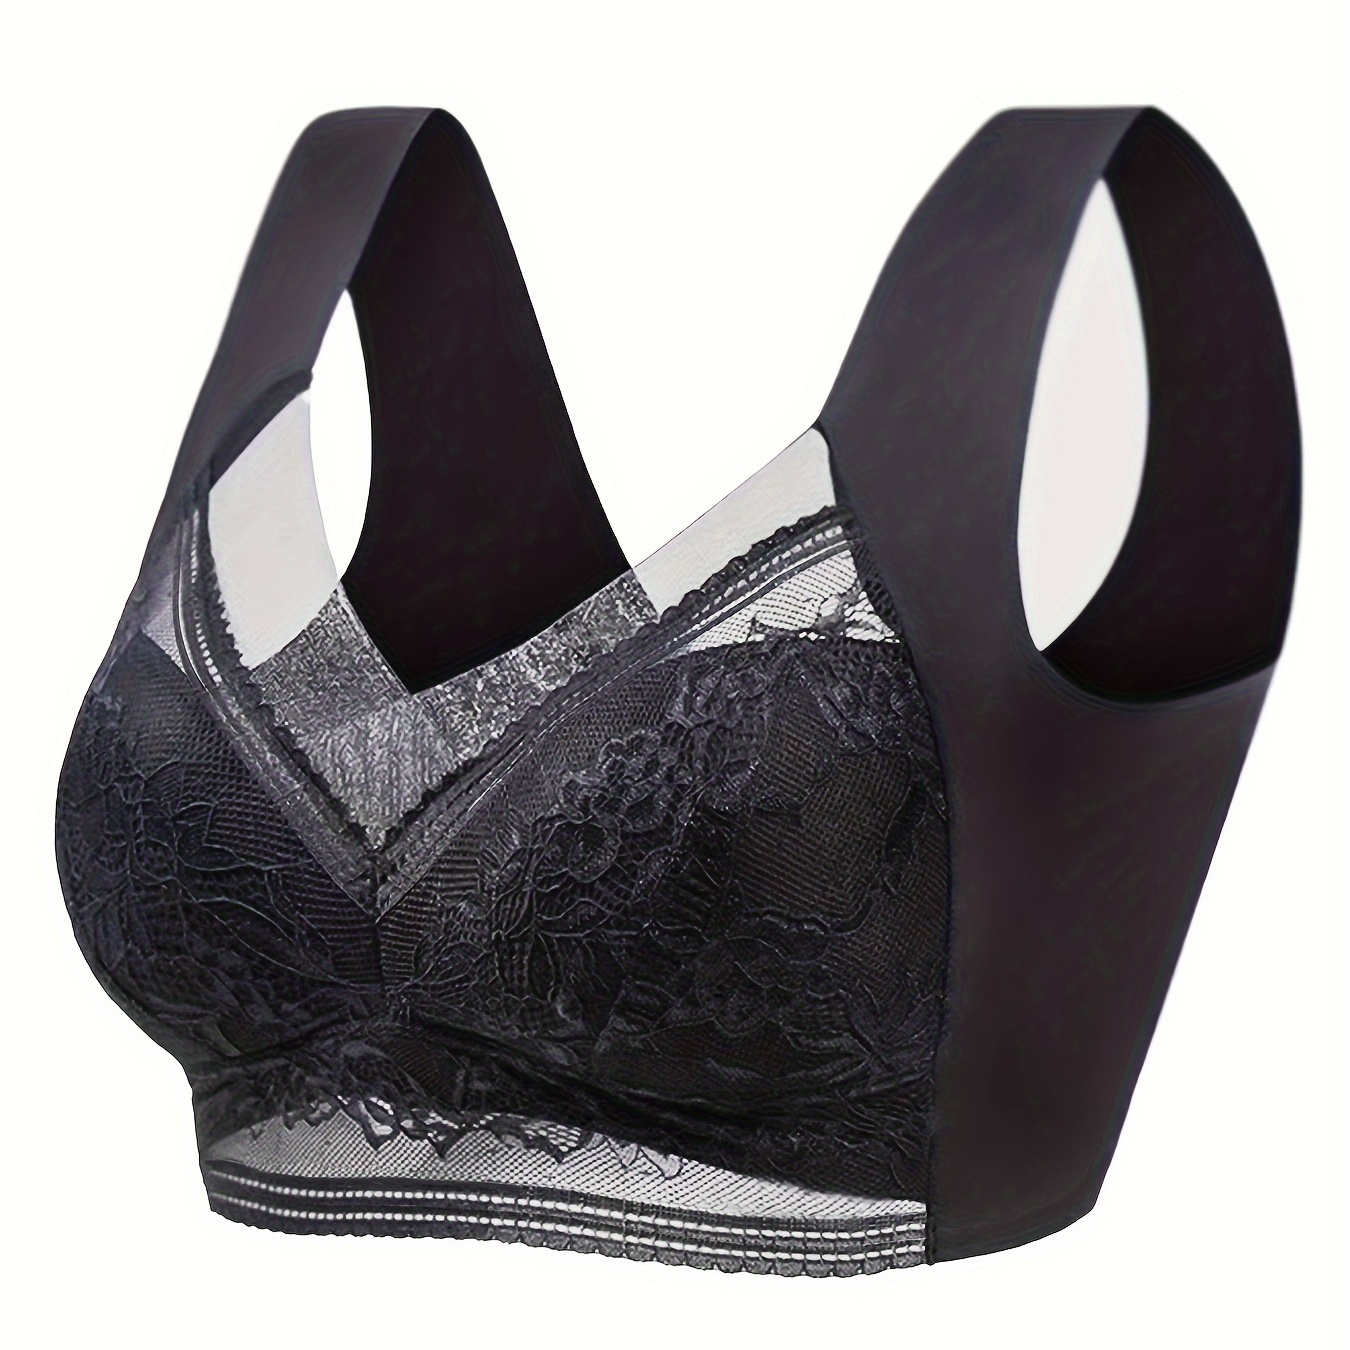 

Floral Lace Decor Full-coverage Sports Bra For Women, Comfortable Breathable Bra,women's Activewear